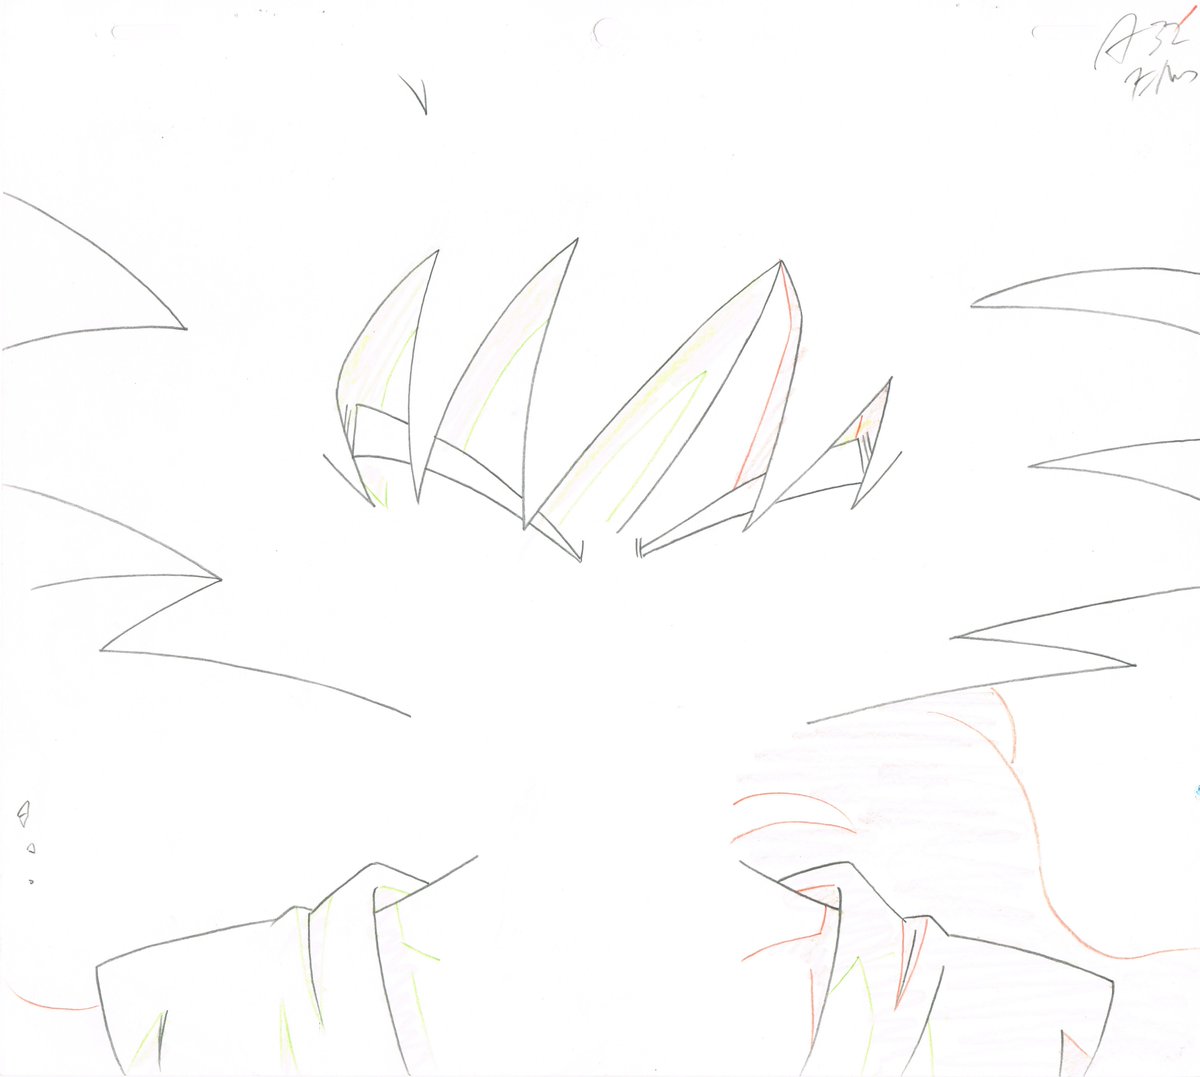 Biggest Fight! Dragon Ball GT Final Bout Animation Cel, Douga and Layout of Kid Goku from the Opening! 